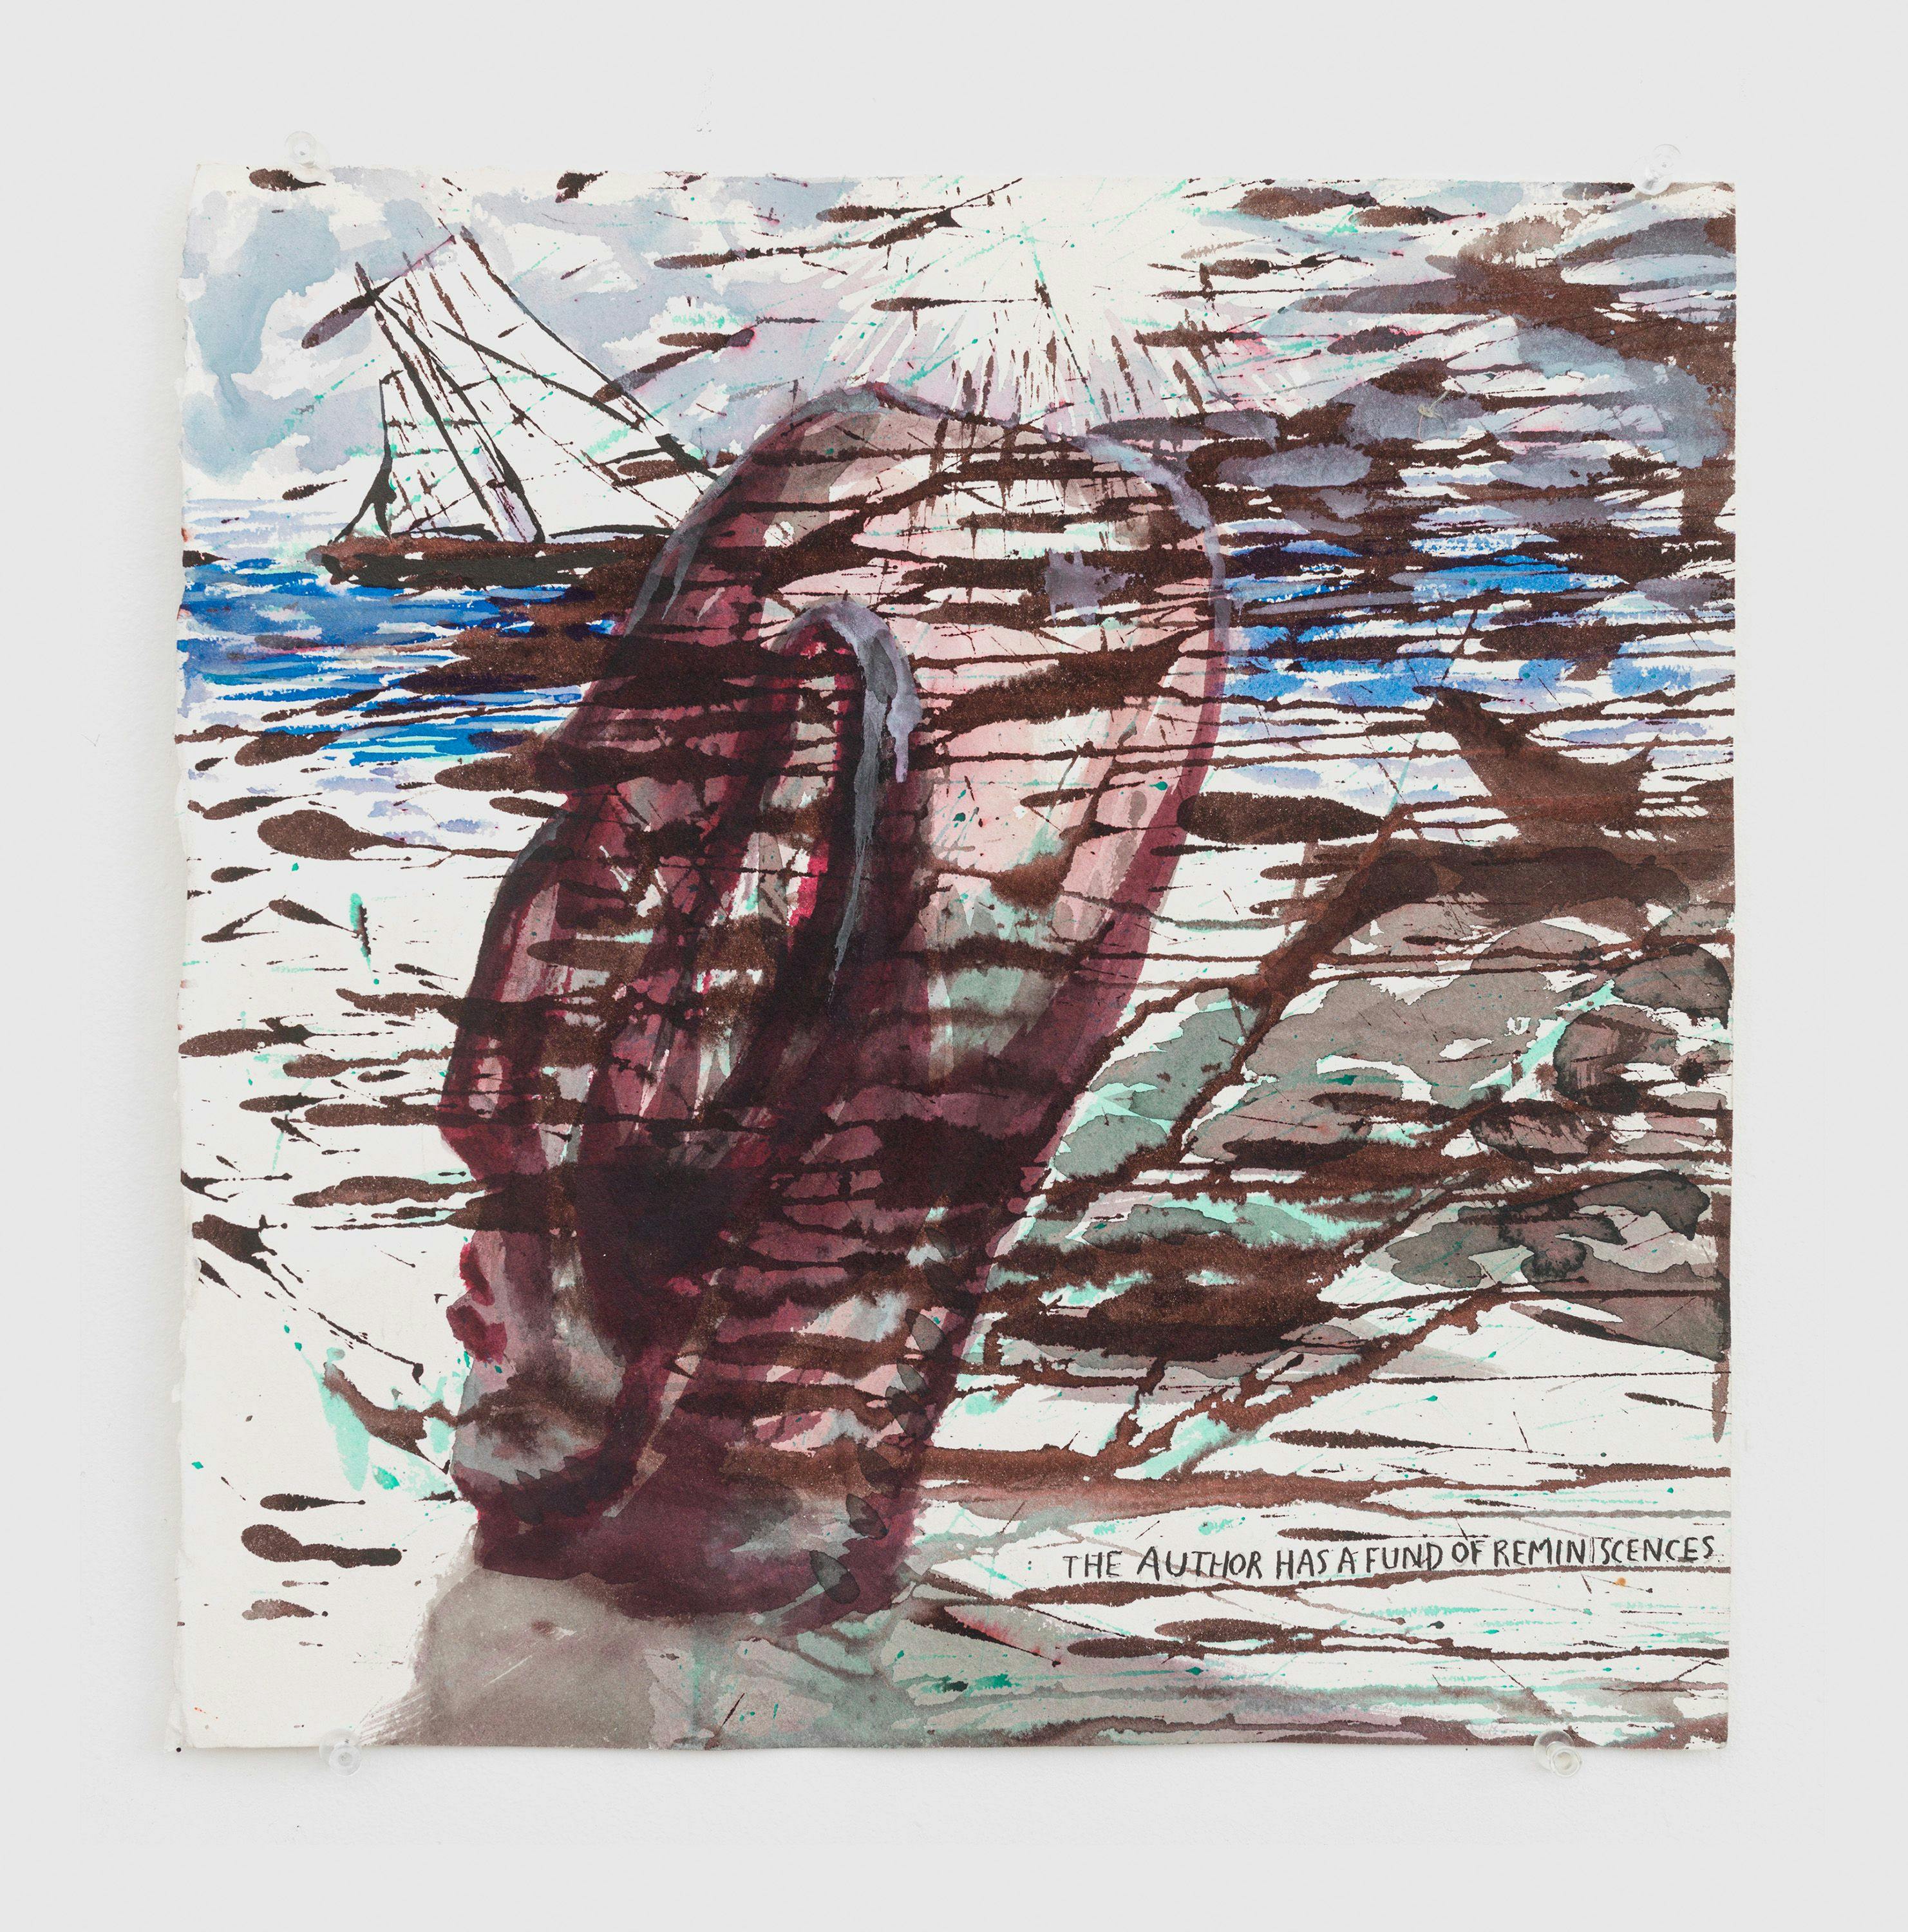 A work on paper by Raymond Pettibon, titled No Title (The author has...), dated 2003.